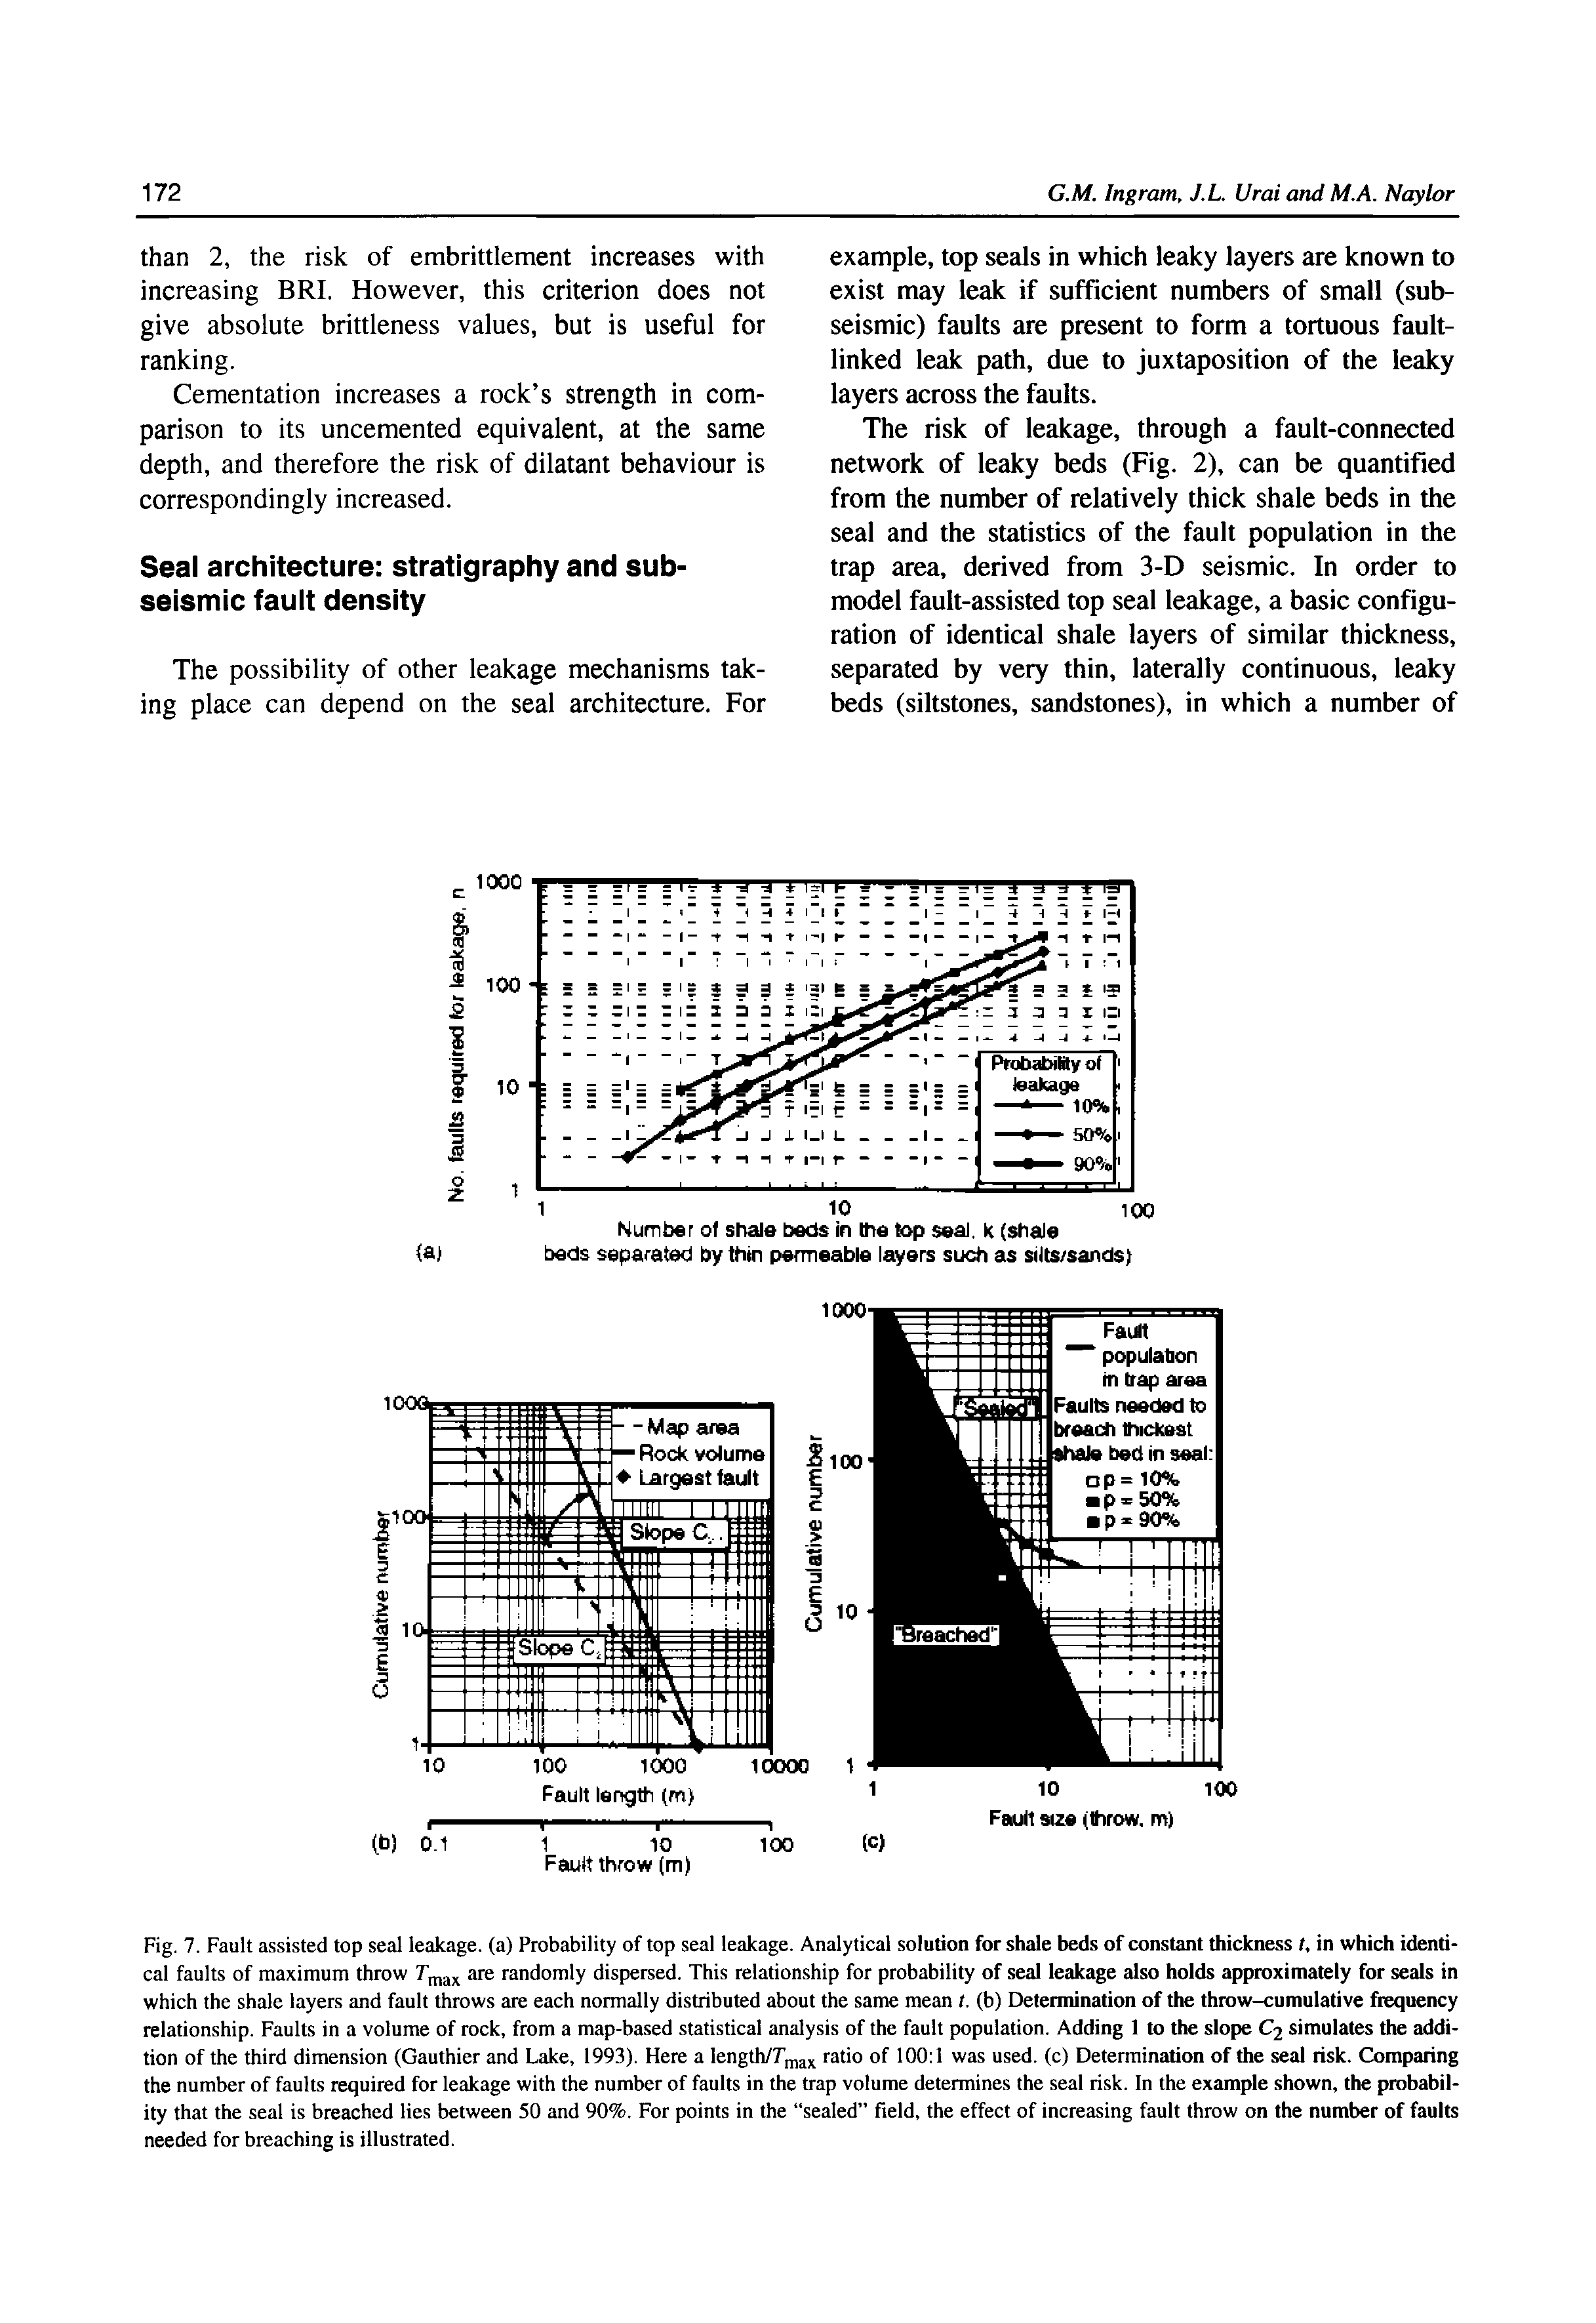 Fig. 7. Fault assisted top seal leakage, (a) Probability of top seal leakage. Analytical solution for shale beds of constant thickness /, in which identical faults of maximum throw are randomly dispersed. This relationship for probability of seal leakage also holds approximately for seals in which the shale layers and fault throws are each normally distributed about the same mean t. (b) Determination of the throw-cumulative frequency relationship. Faults in a volume of rock, from a map-based statistical analysis of the fault population. Adding 1 to the slope C2 simulates the addition of the third dimension (Gauthier and Lake, 1993). Here a length/Tfnjx fst o 100 1 was used, (c) Determination of the seal risk. Comparing the number of faults required for leakage with the number of faults in the trap volume determines the seal risk. In the example shown, the probability that the seal is breached lies between 50 and 90%, For points in the sealed field, the effect of increasing fault throw on the number of faults needed for breaching is illustrated.